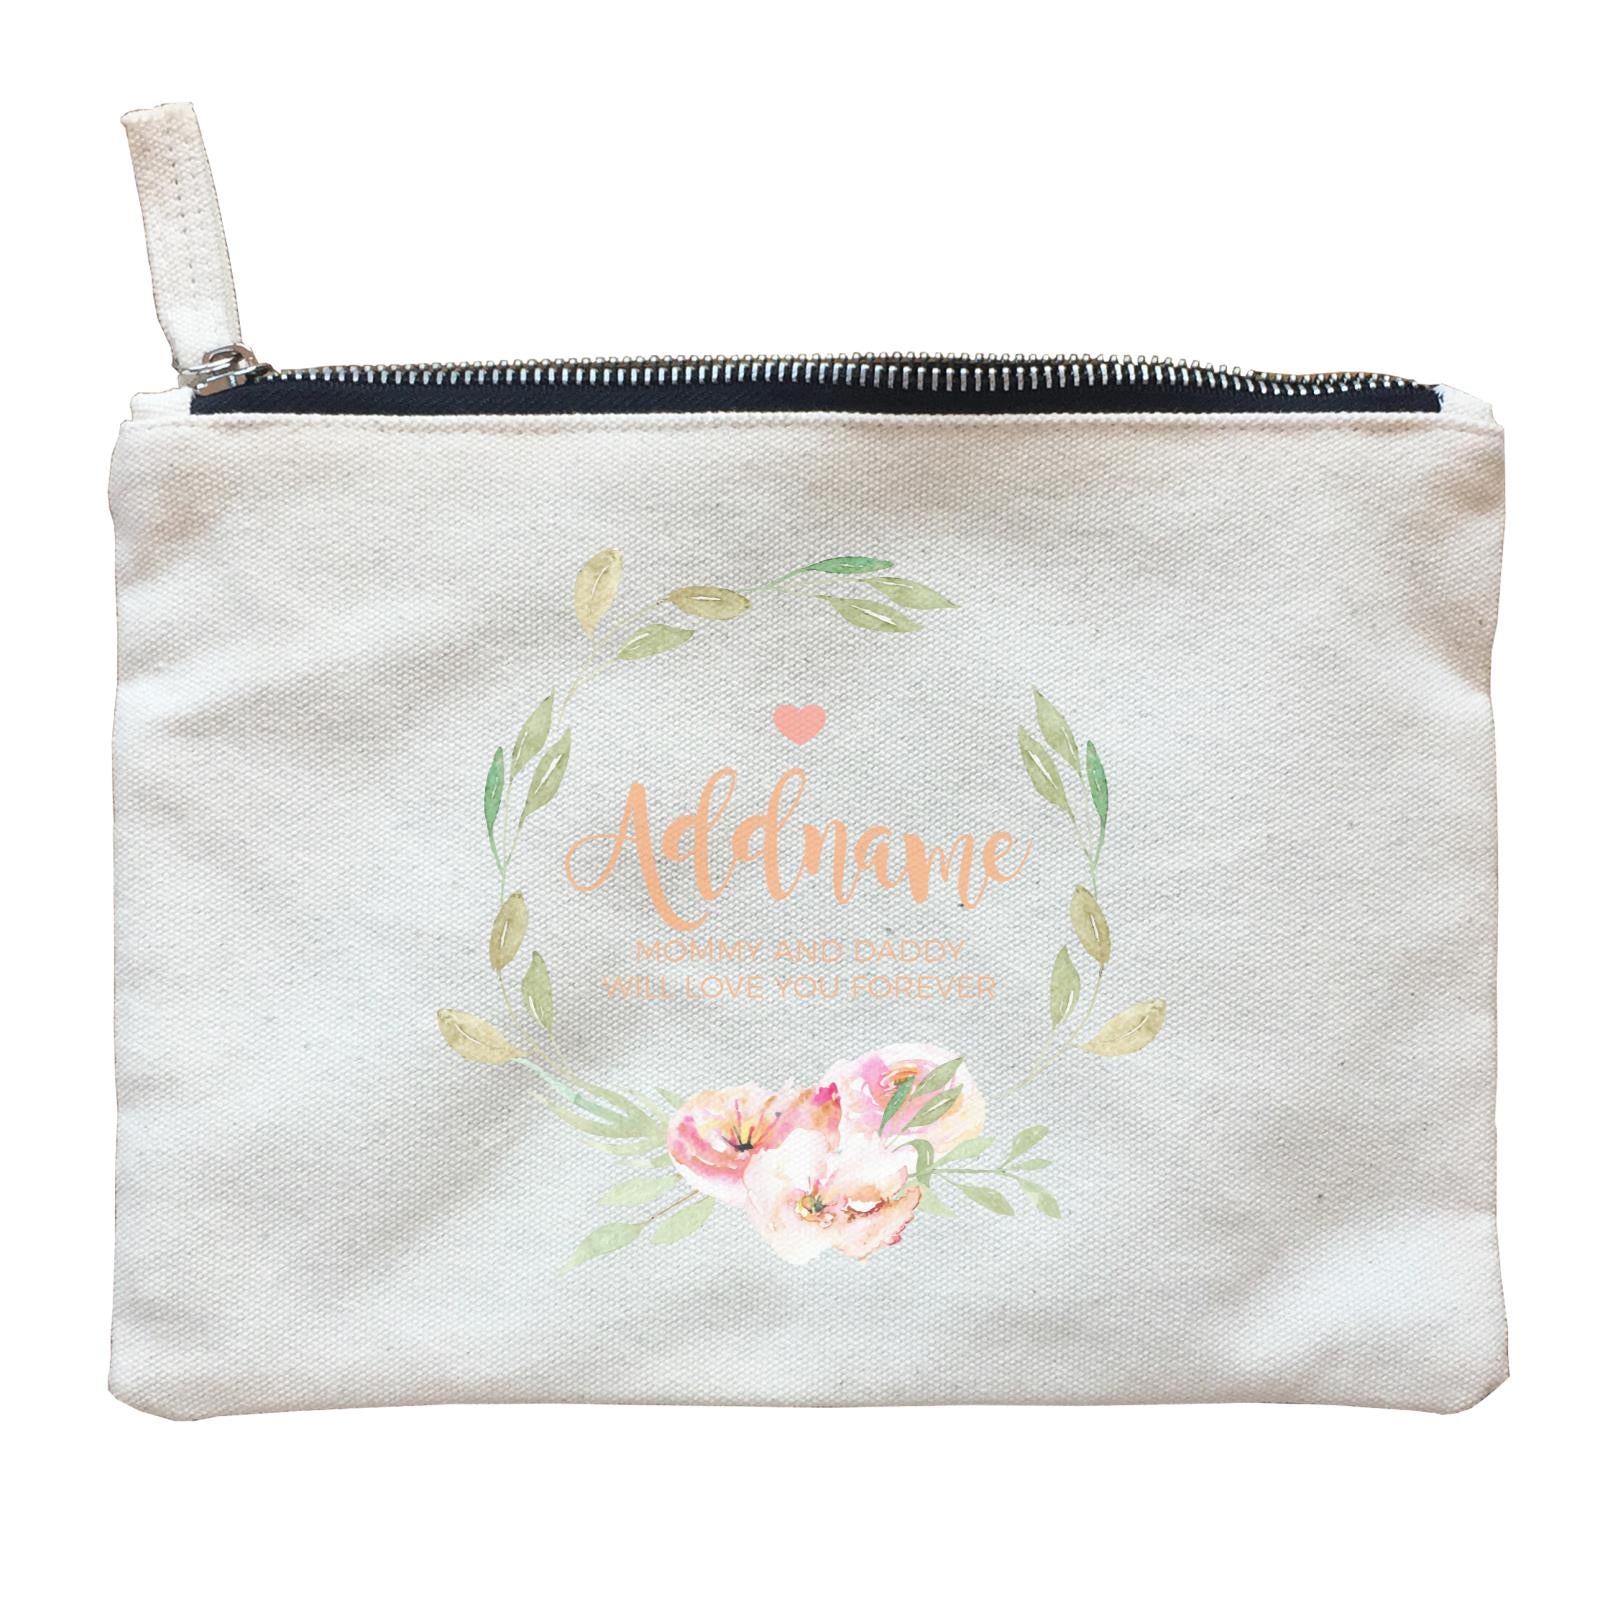 Watercolour Sweet Pink Flowers Wreath Personalizable with Name and Text Zipper Pouch